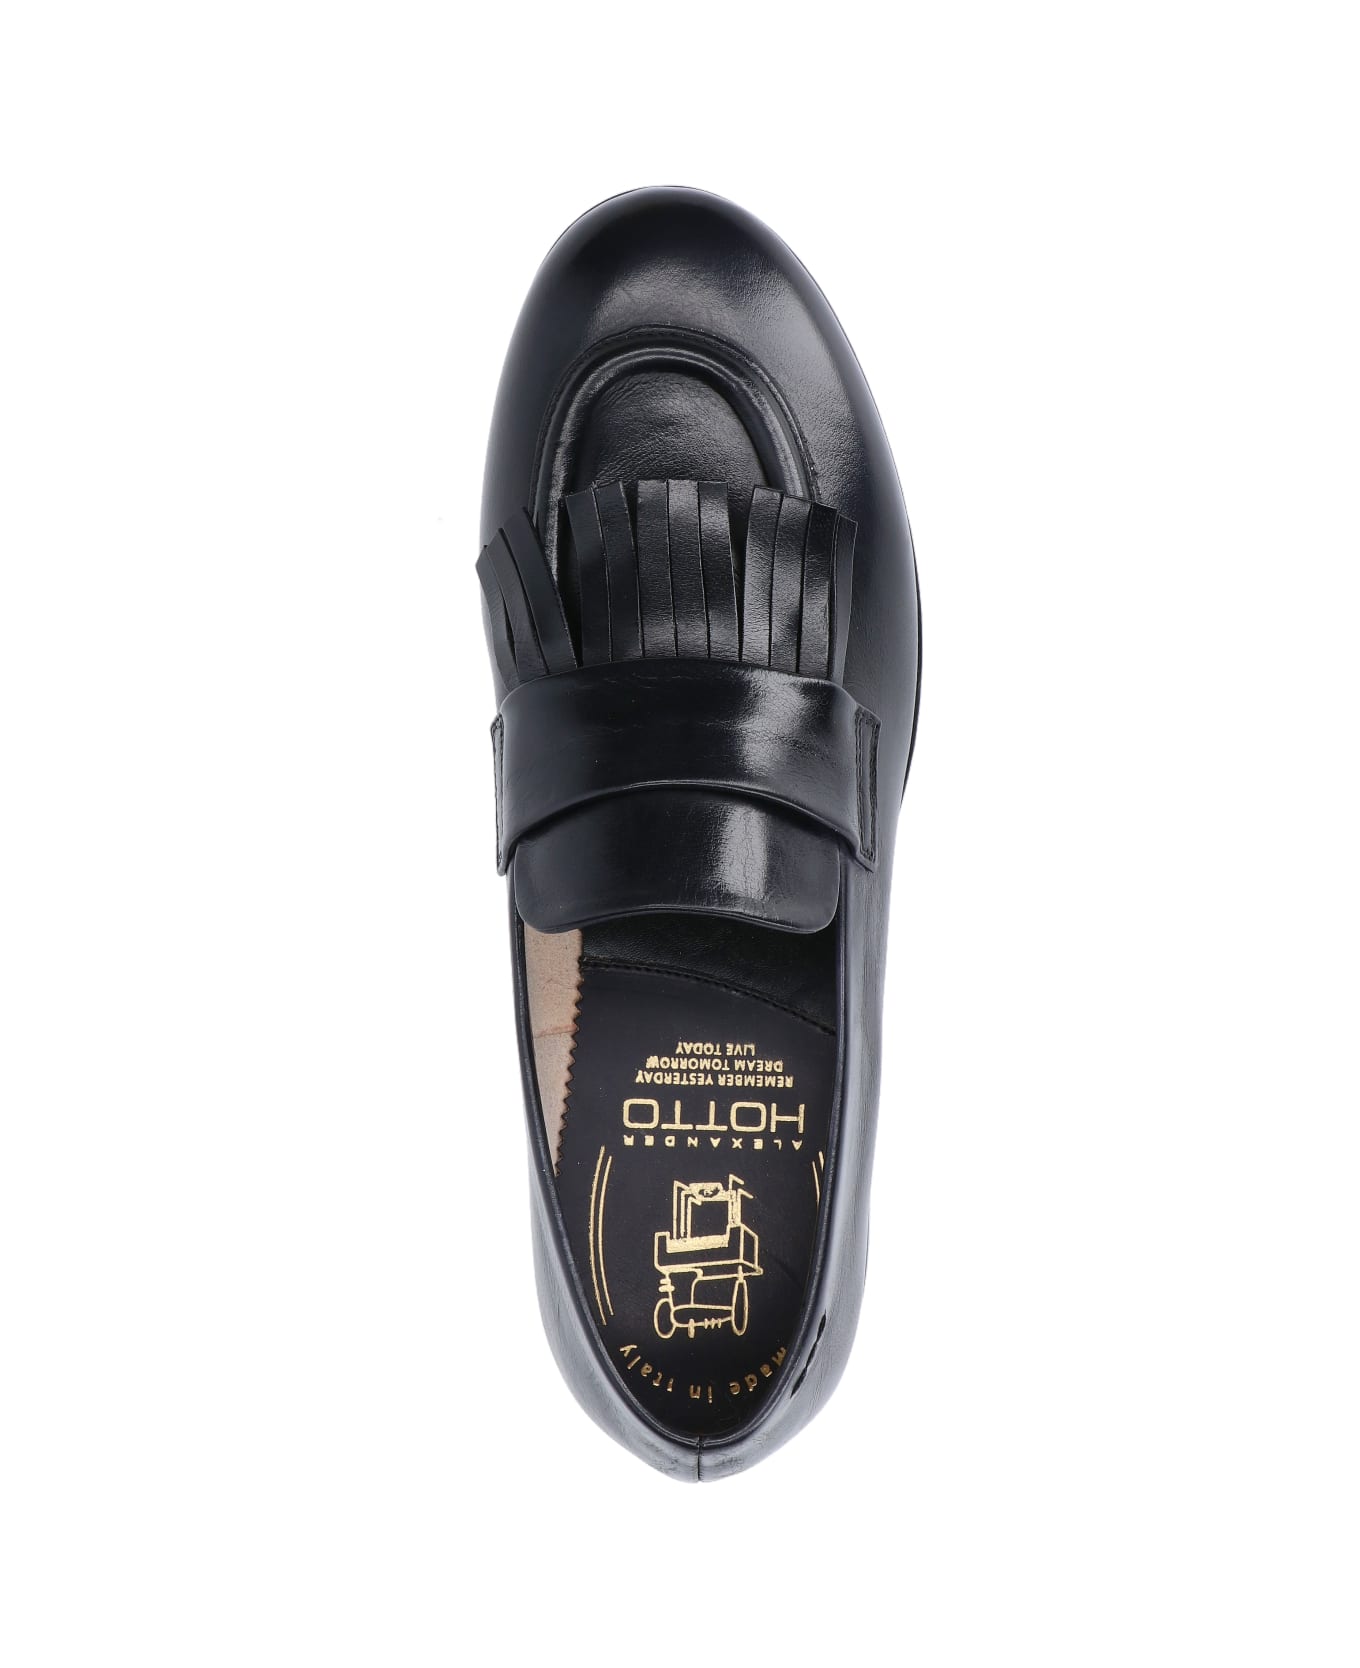 Alexander Hotto Fringed Detail Loafers - Black  